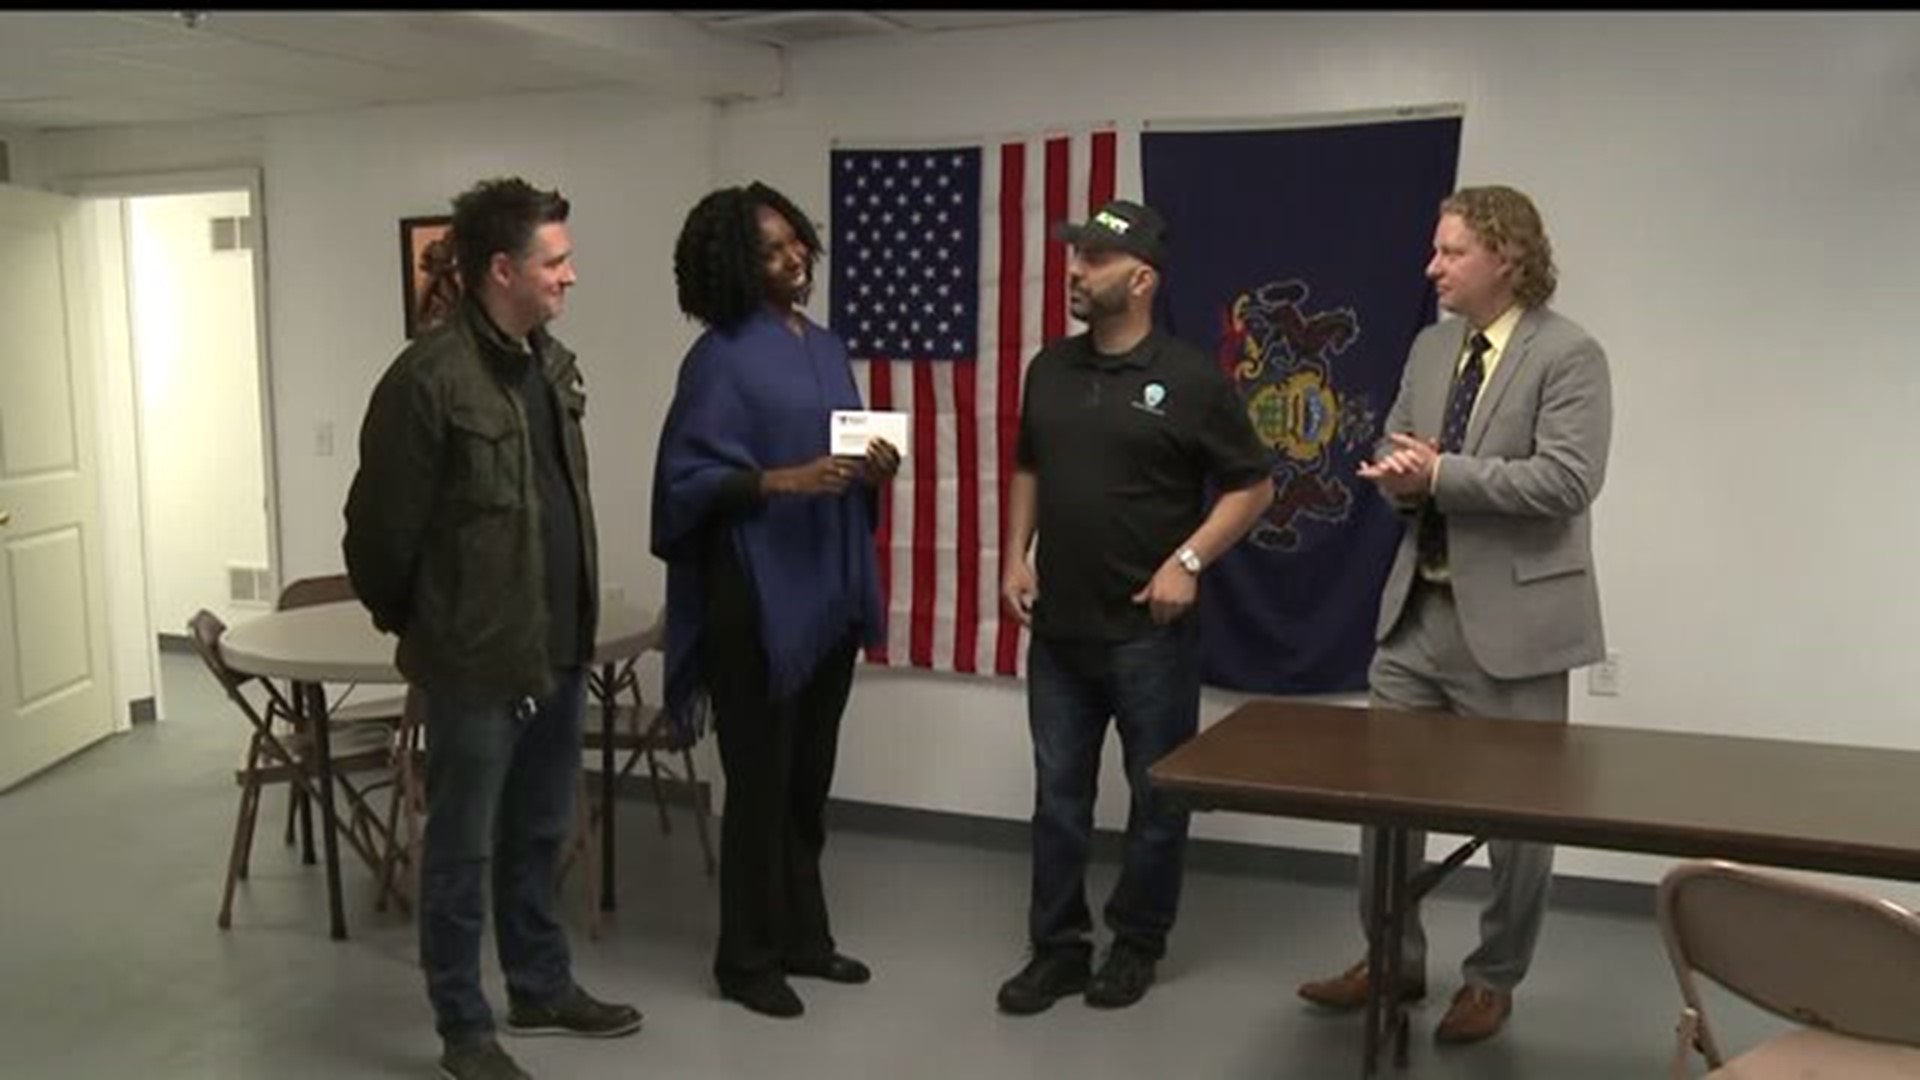 Donation to help Veterans in York